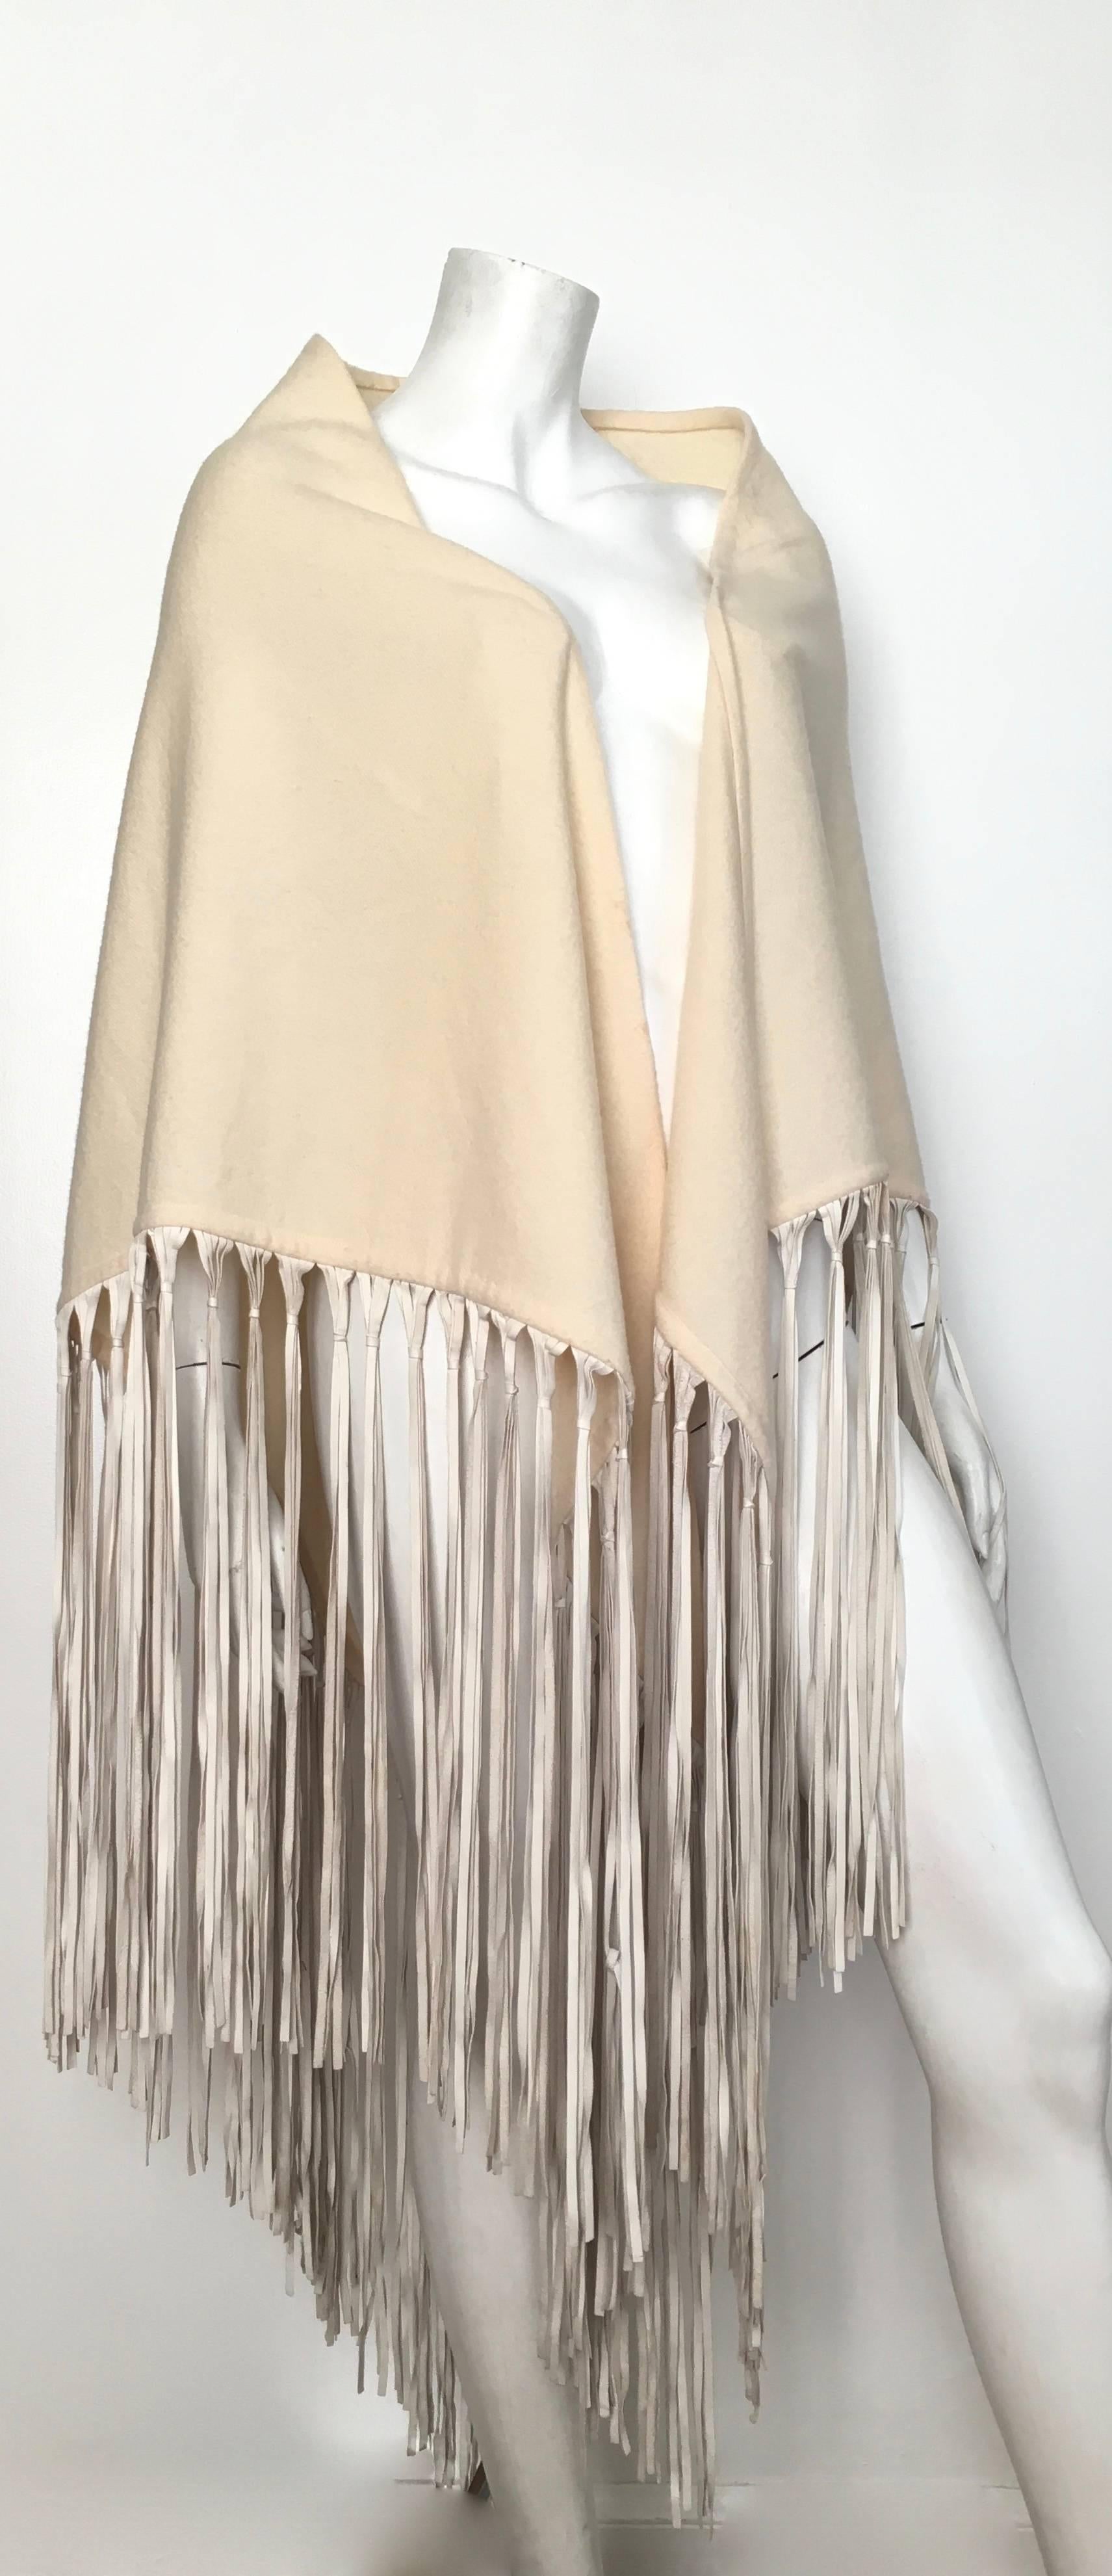 Hermes cream cashmere & wool triangular shawl with leather fringe.  This gorgeous bohemian Hermes shawl was purchased at the Hermes Paris boutique in the 1990s. There are eleven holes that have been re-woven and repaired.  There are four tiny holes